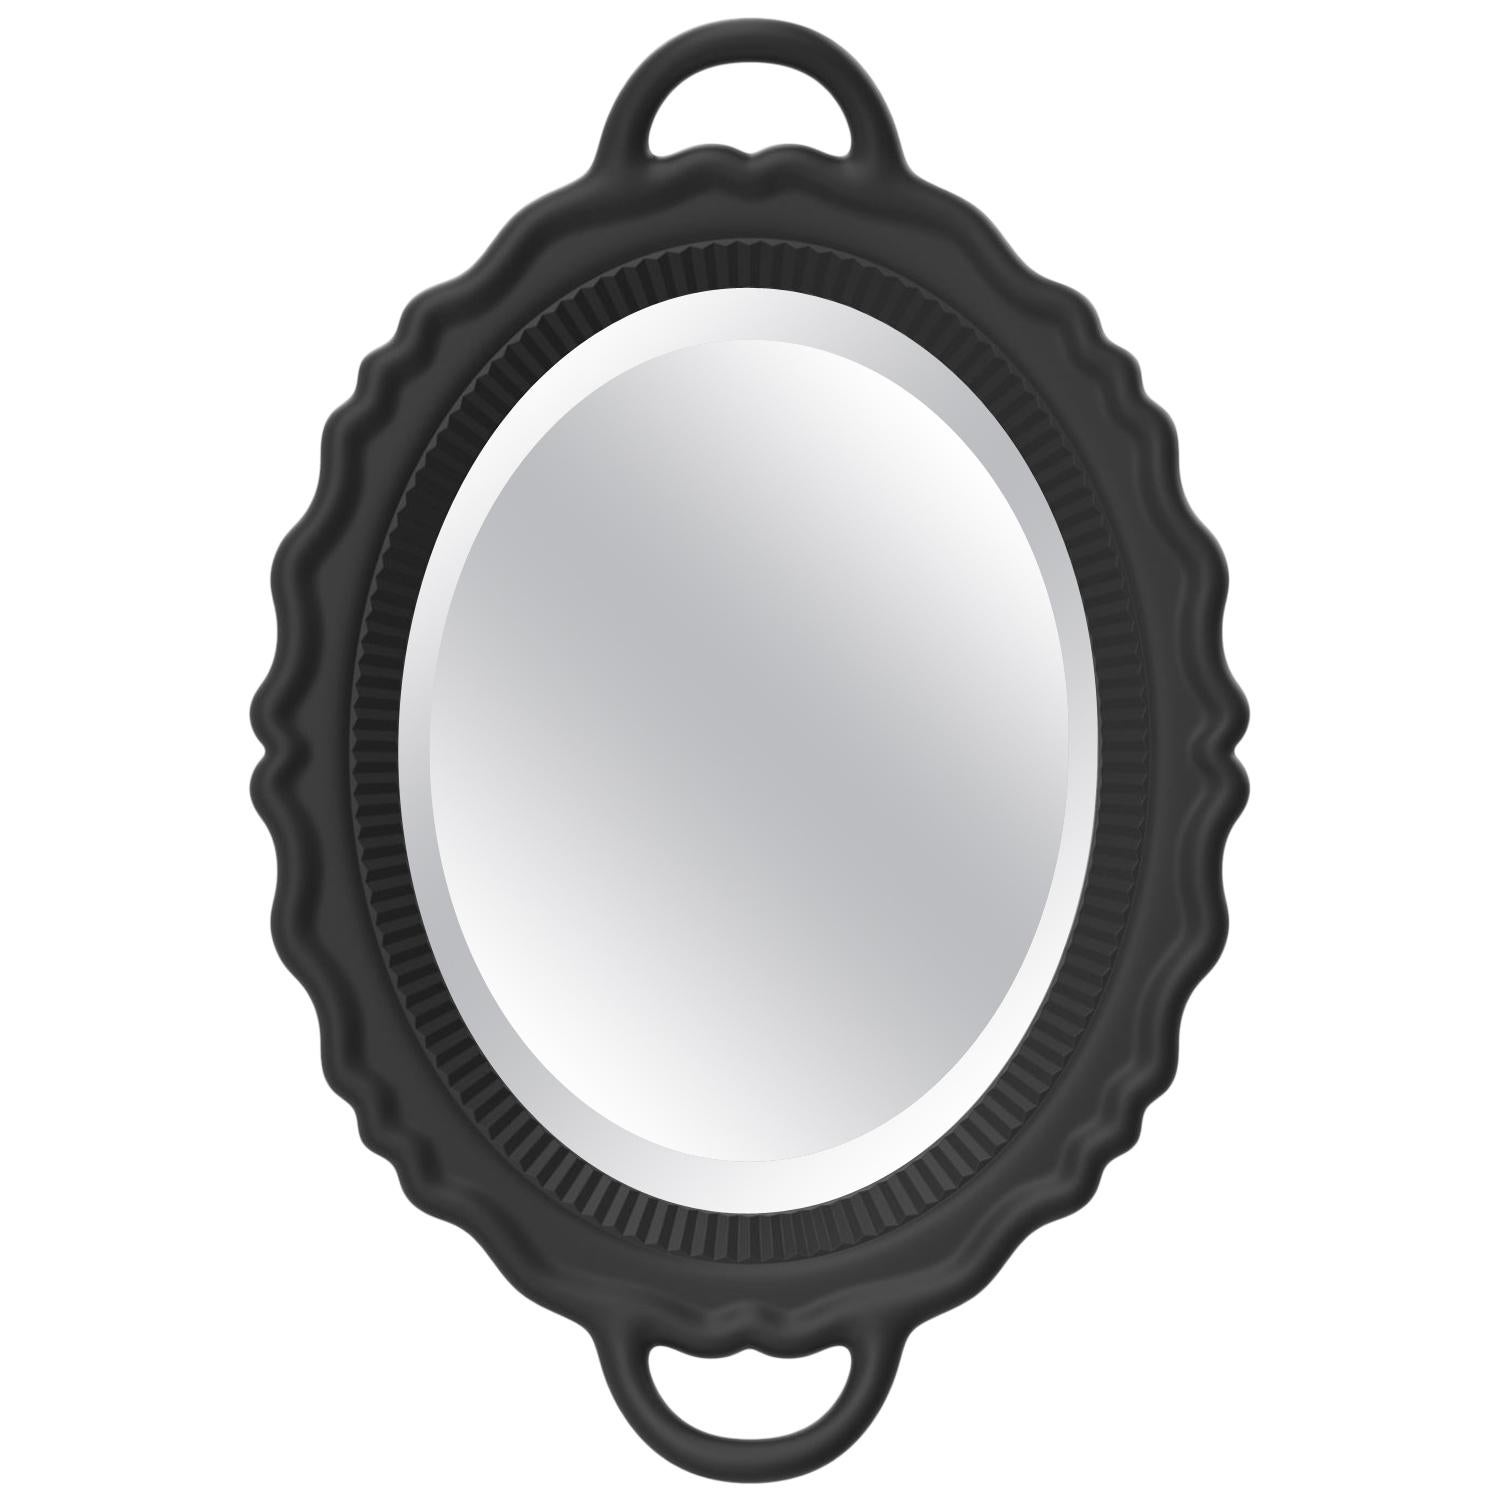 Black Plateau Mirror, Designed by Studio Job, Made in Italy